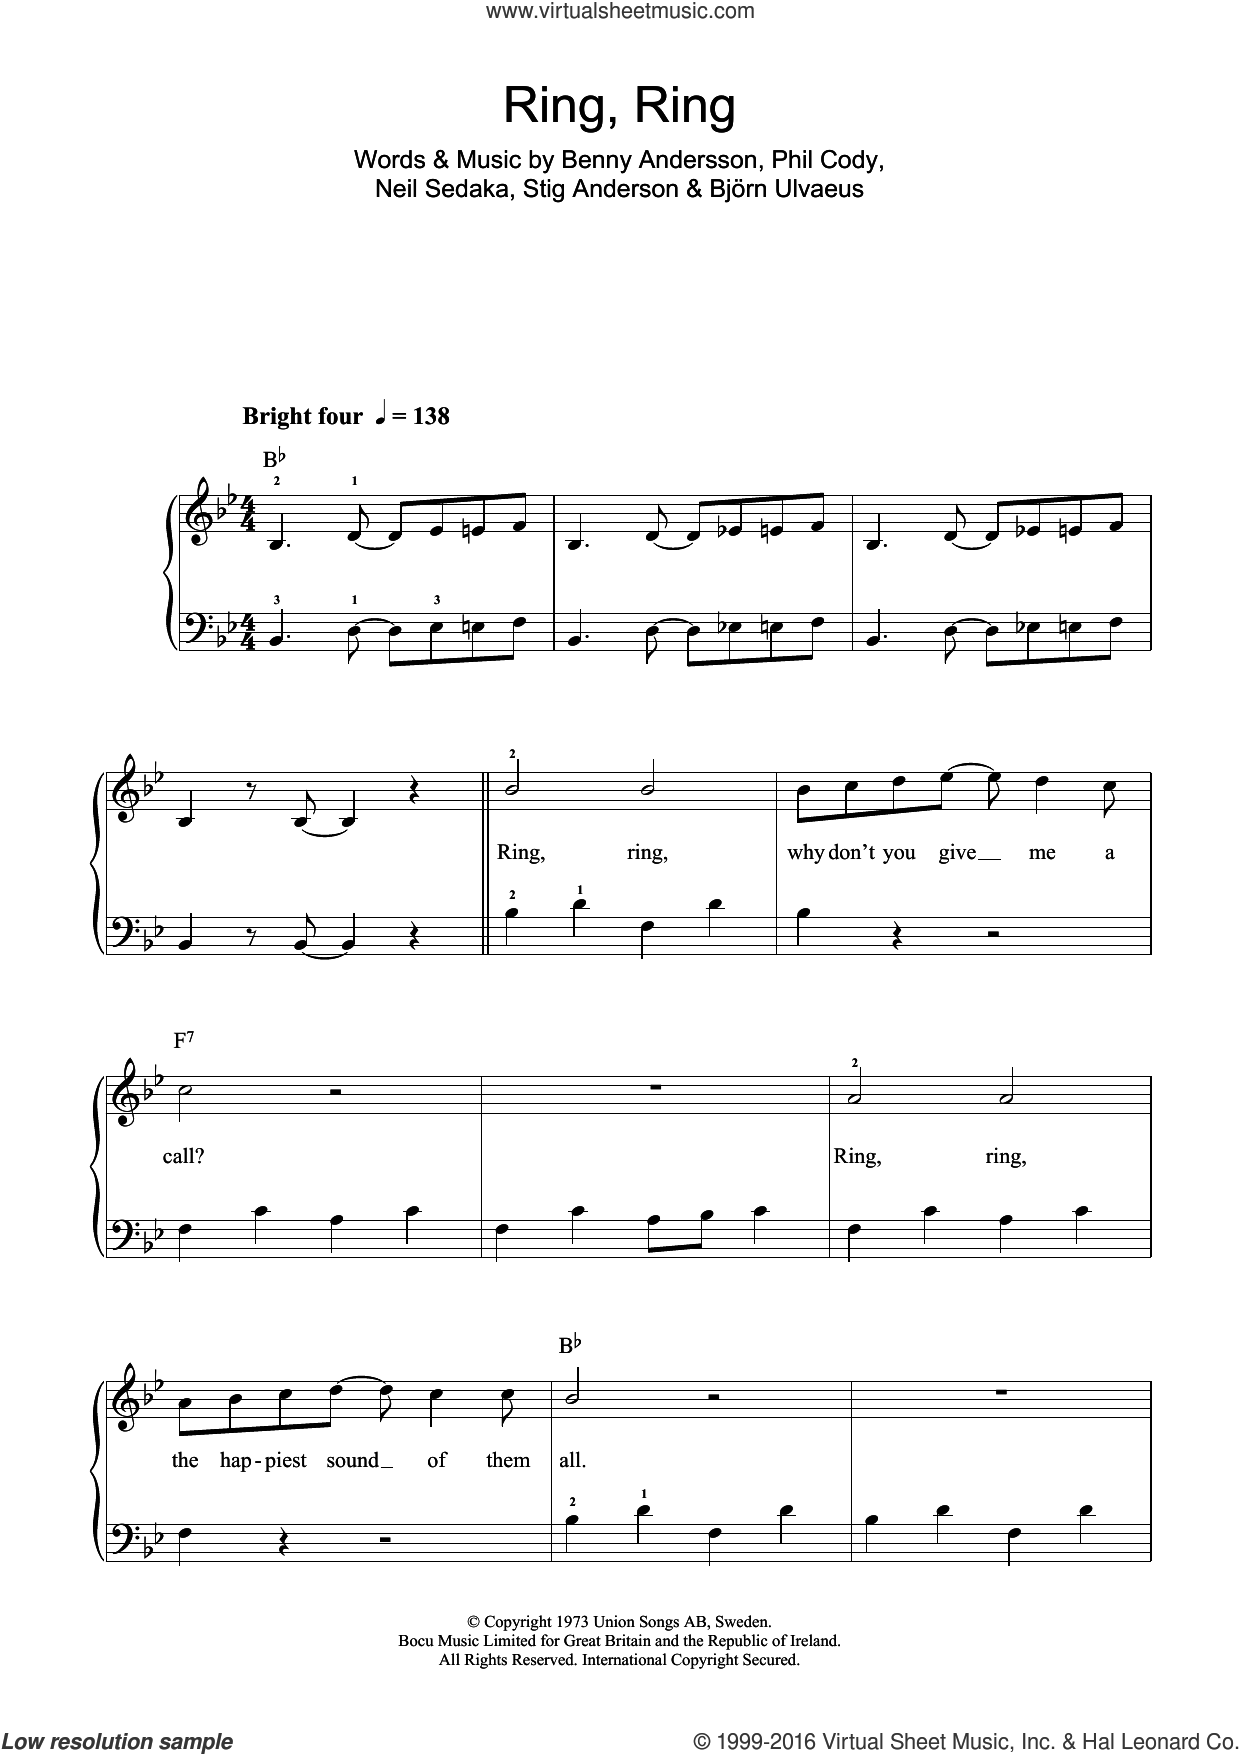 ABBA - Ring, Ring sheet music for piano solo (beginners) [PDF]